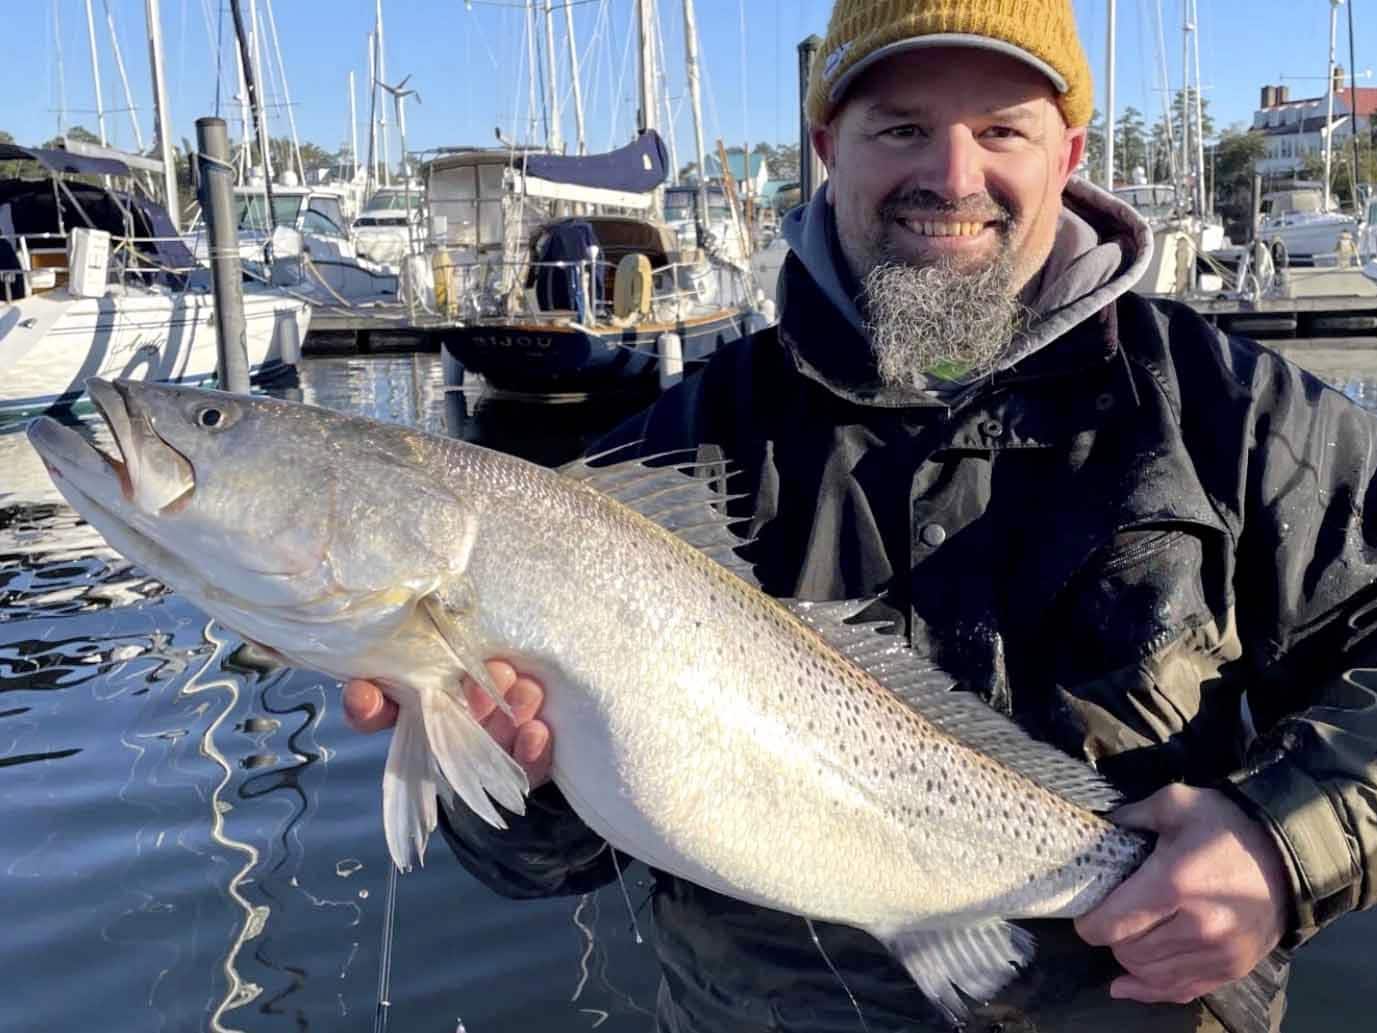 Which jighead is best for speckled trout fishing? - Carolina Sportsman